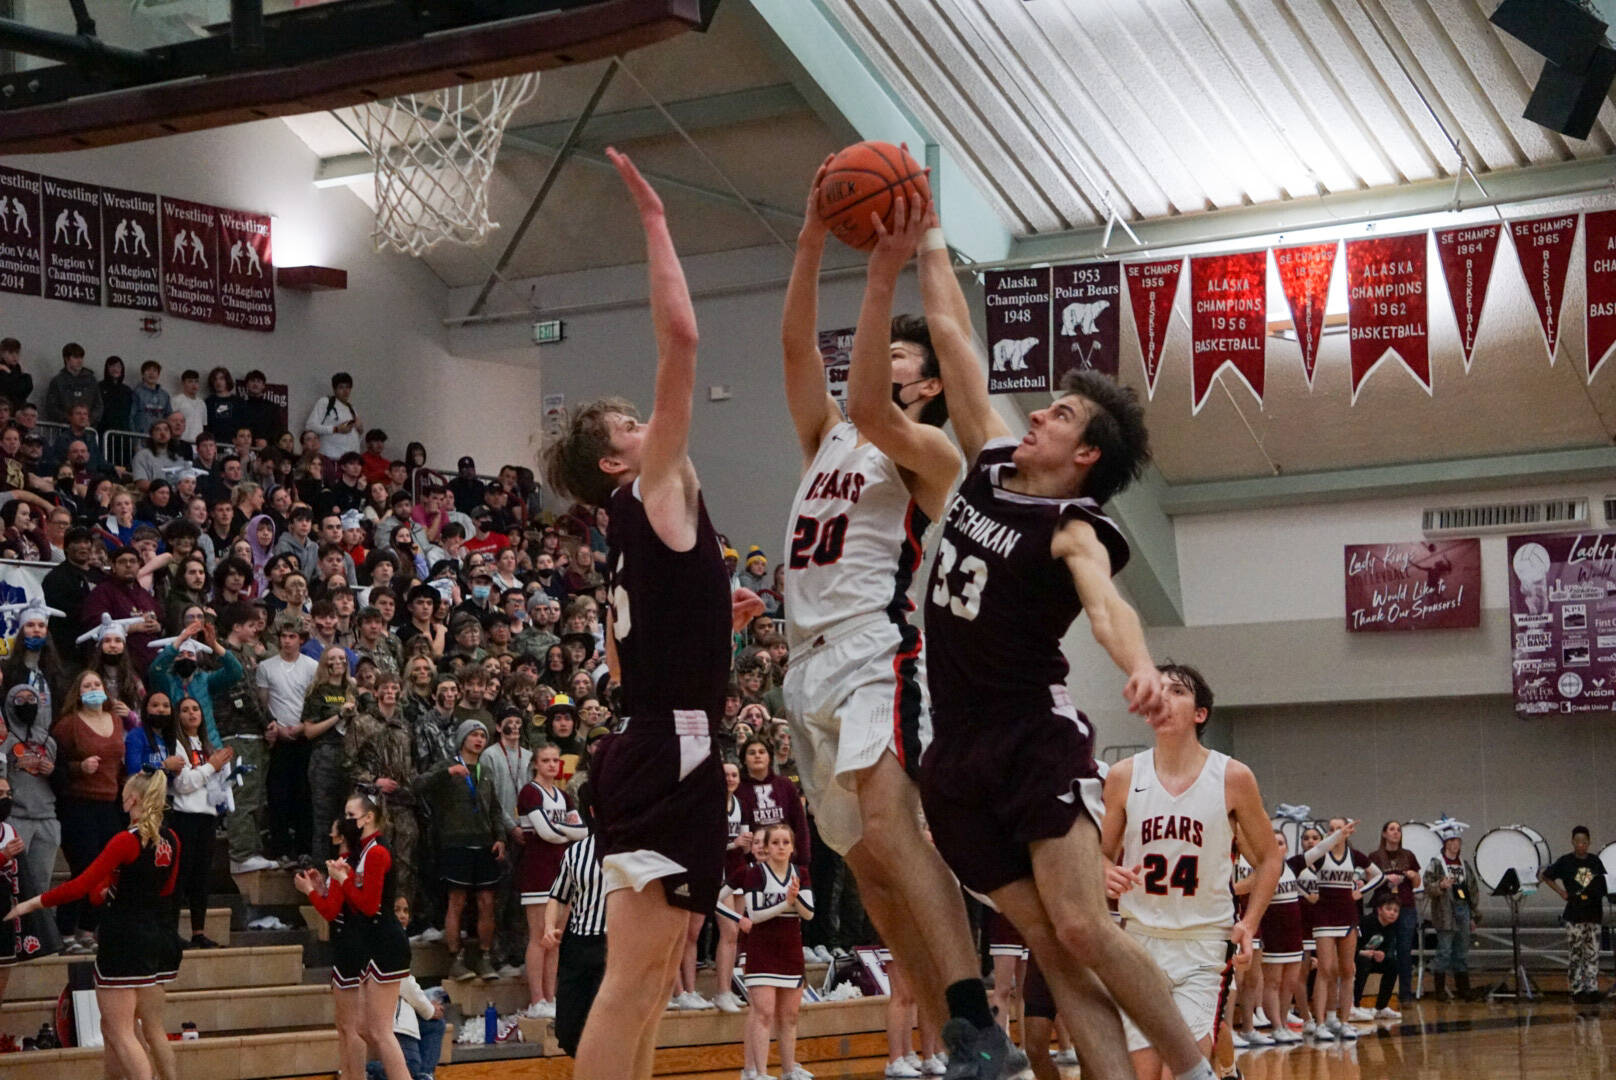 JDHS' Orion Dybdahl (20), a junior, rises for a shot in the Region V 4A Tournament championship game against Ketchikan High School. A buzzer-beater by Dybdahl secured the Crimson Bears and tournament win and state tournament berth. (Jeff Lund / Courtesy Photo)